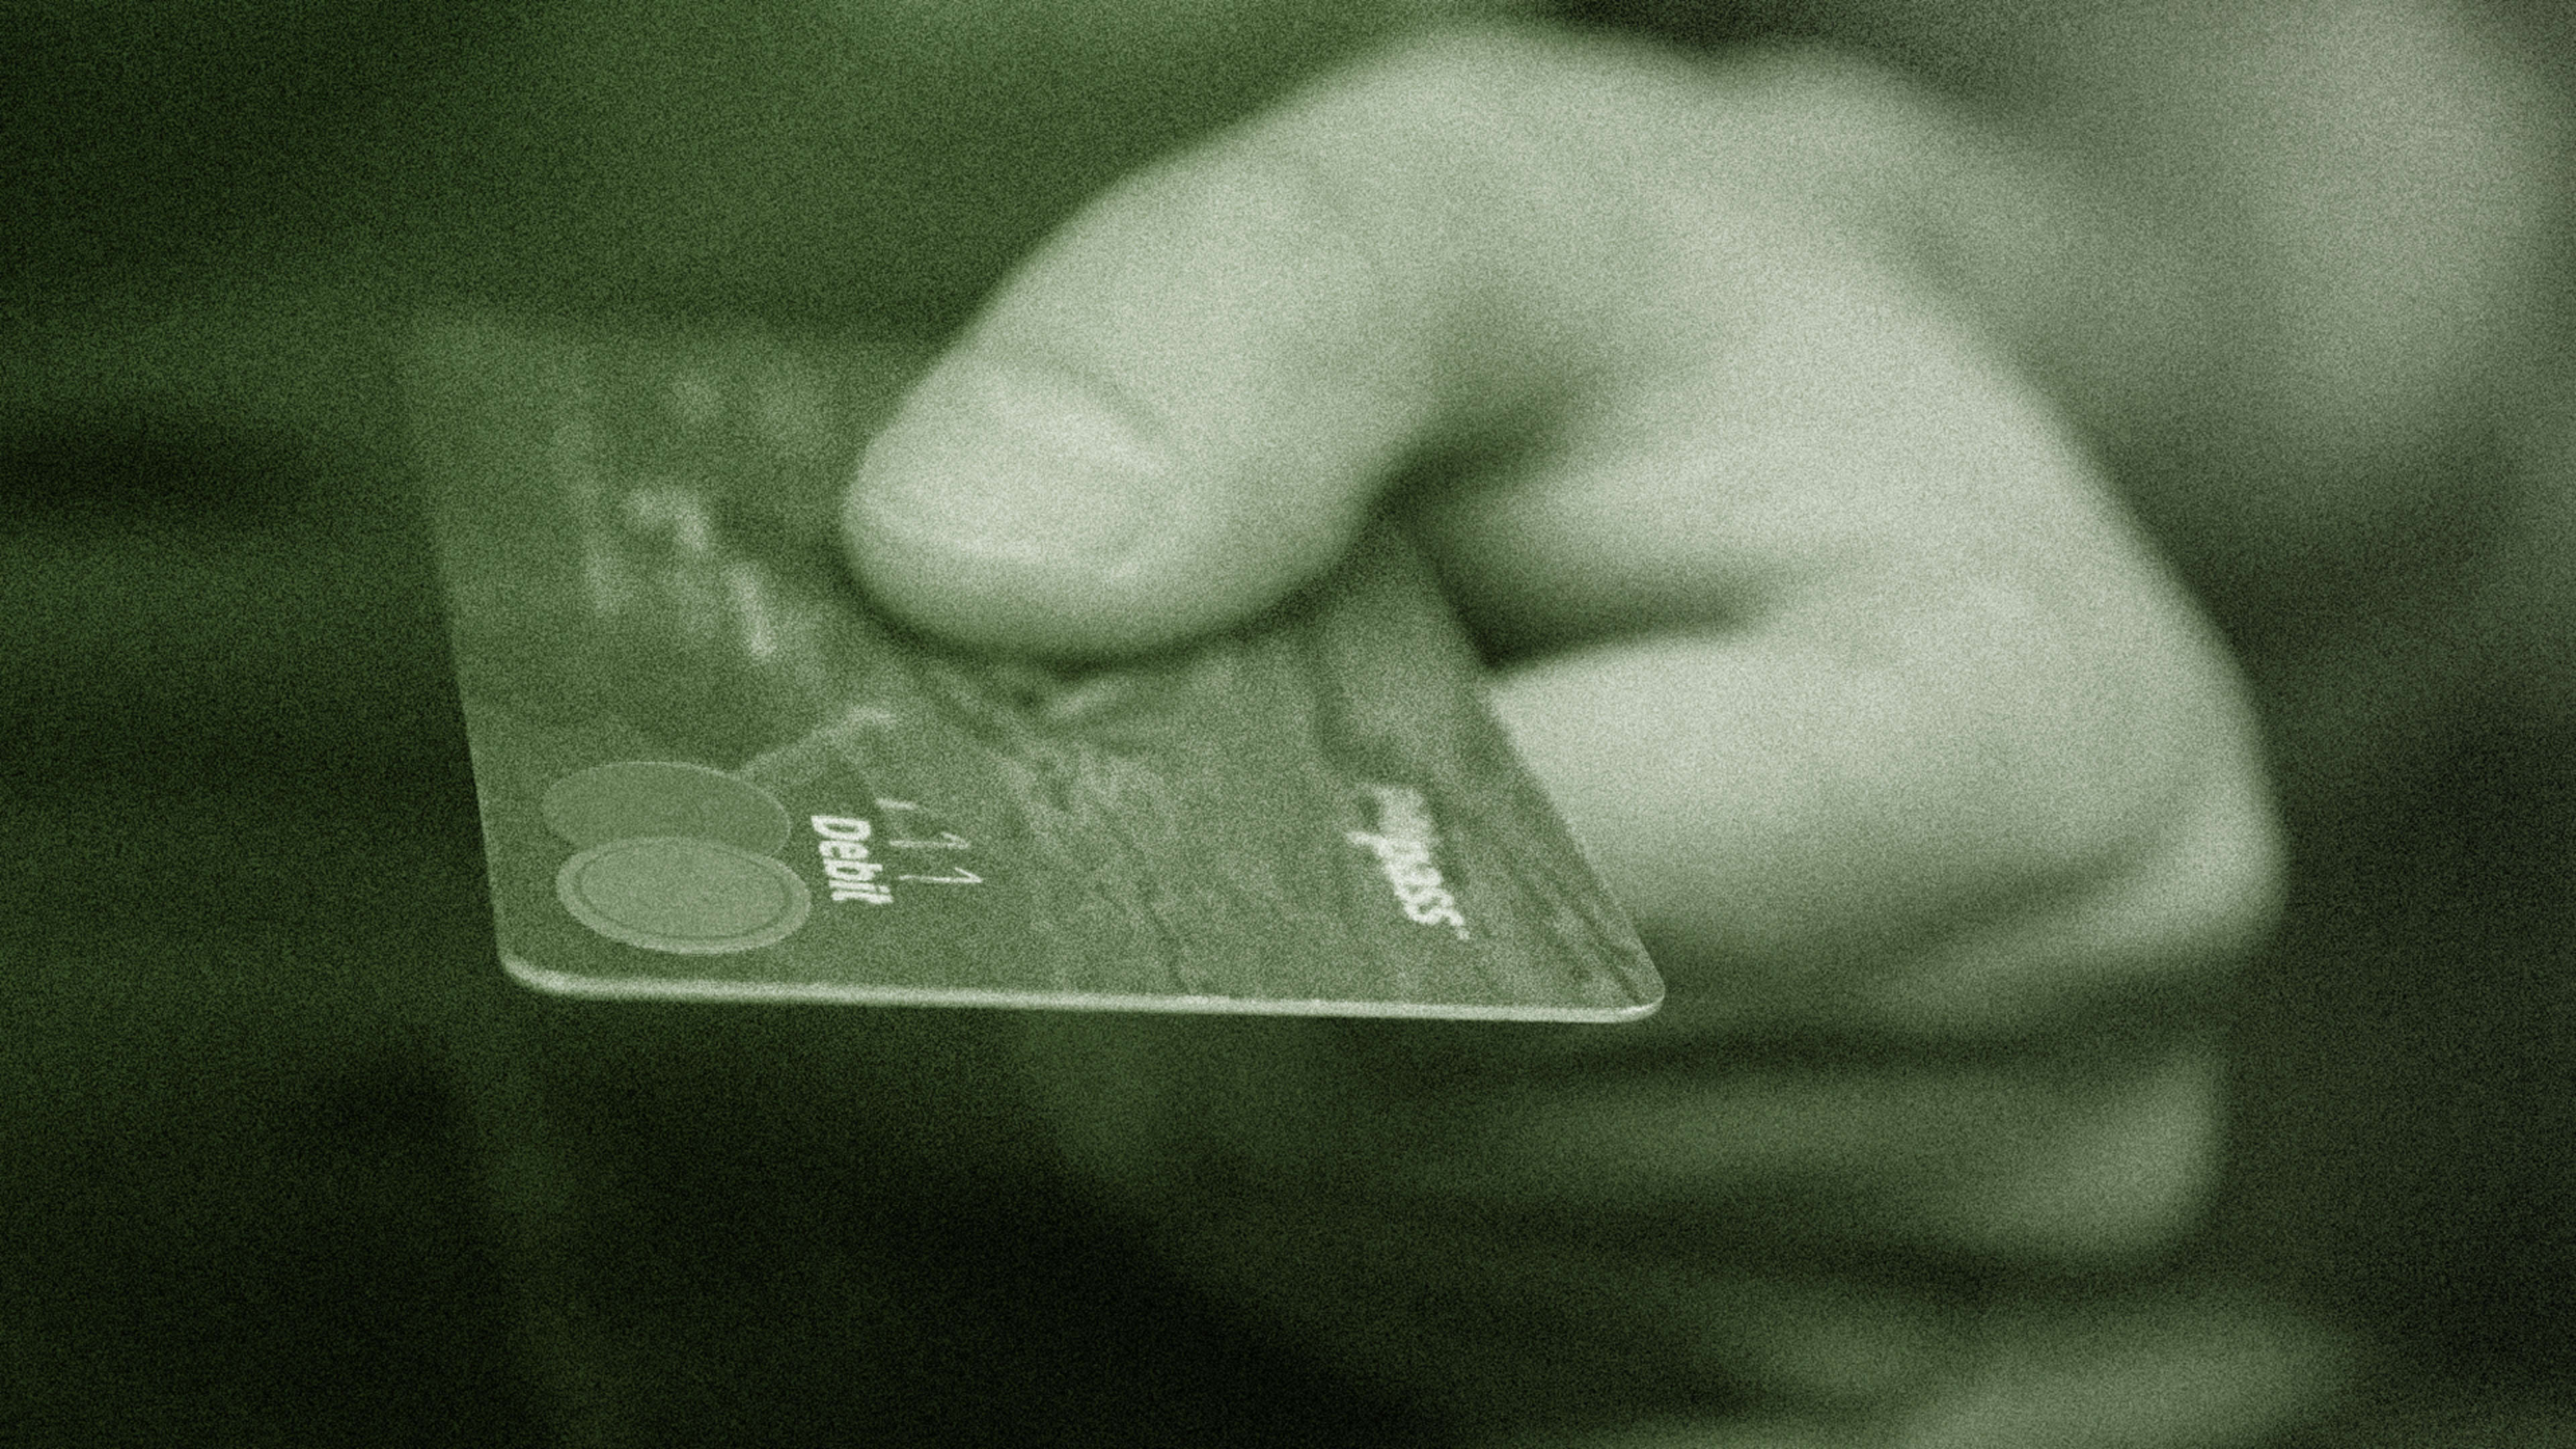 For some crazy reason, people are less concerned about identity theft